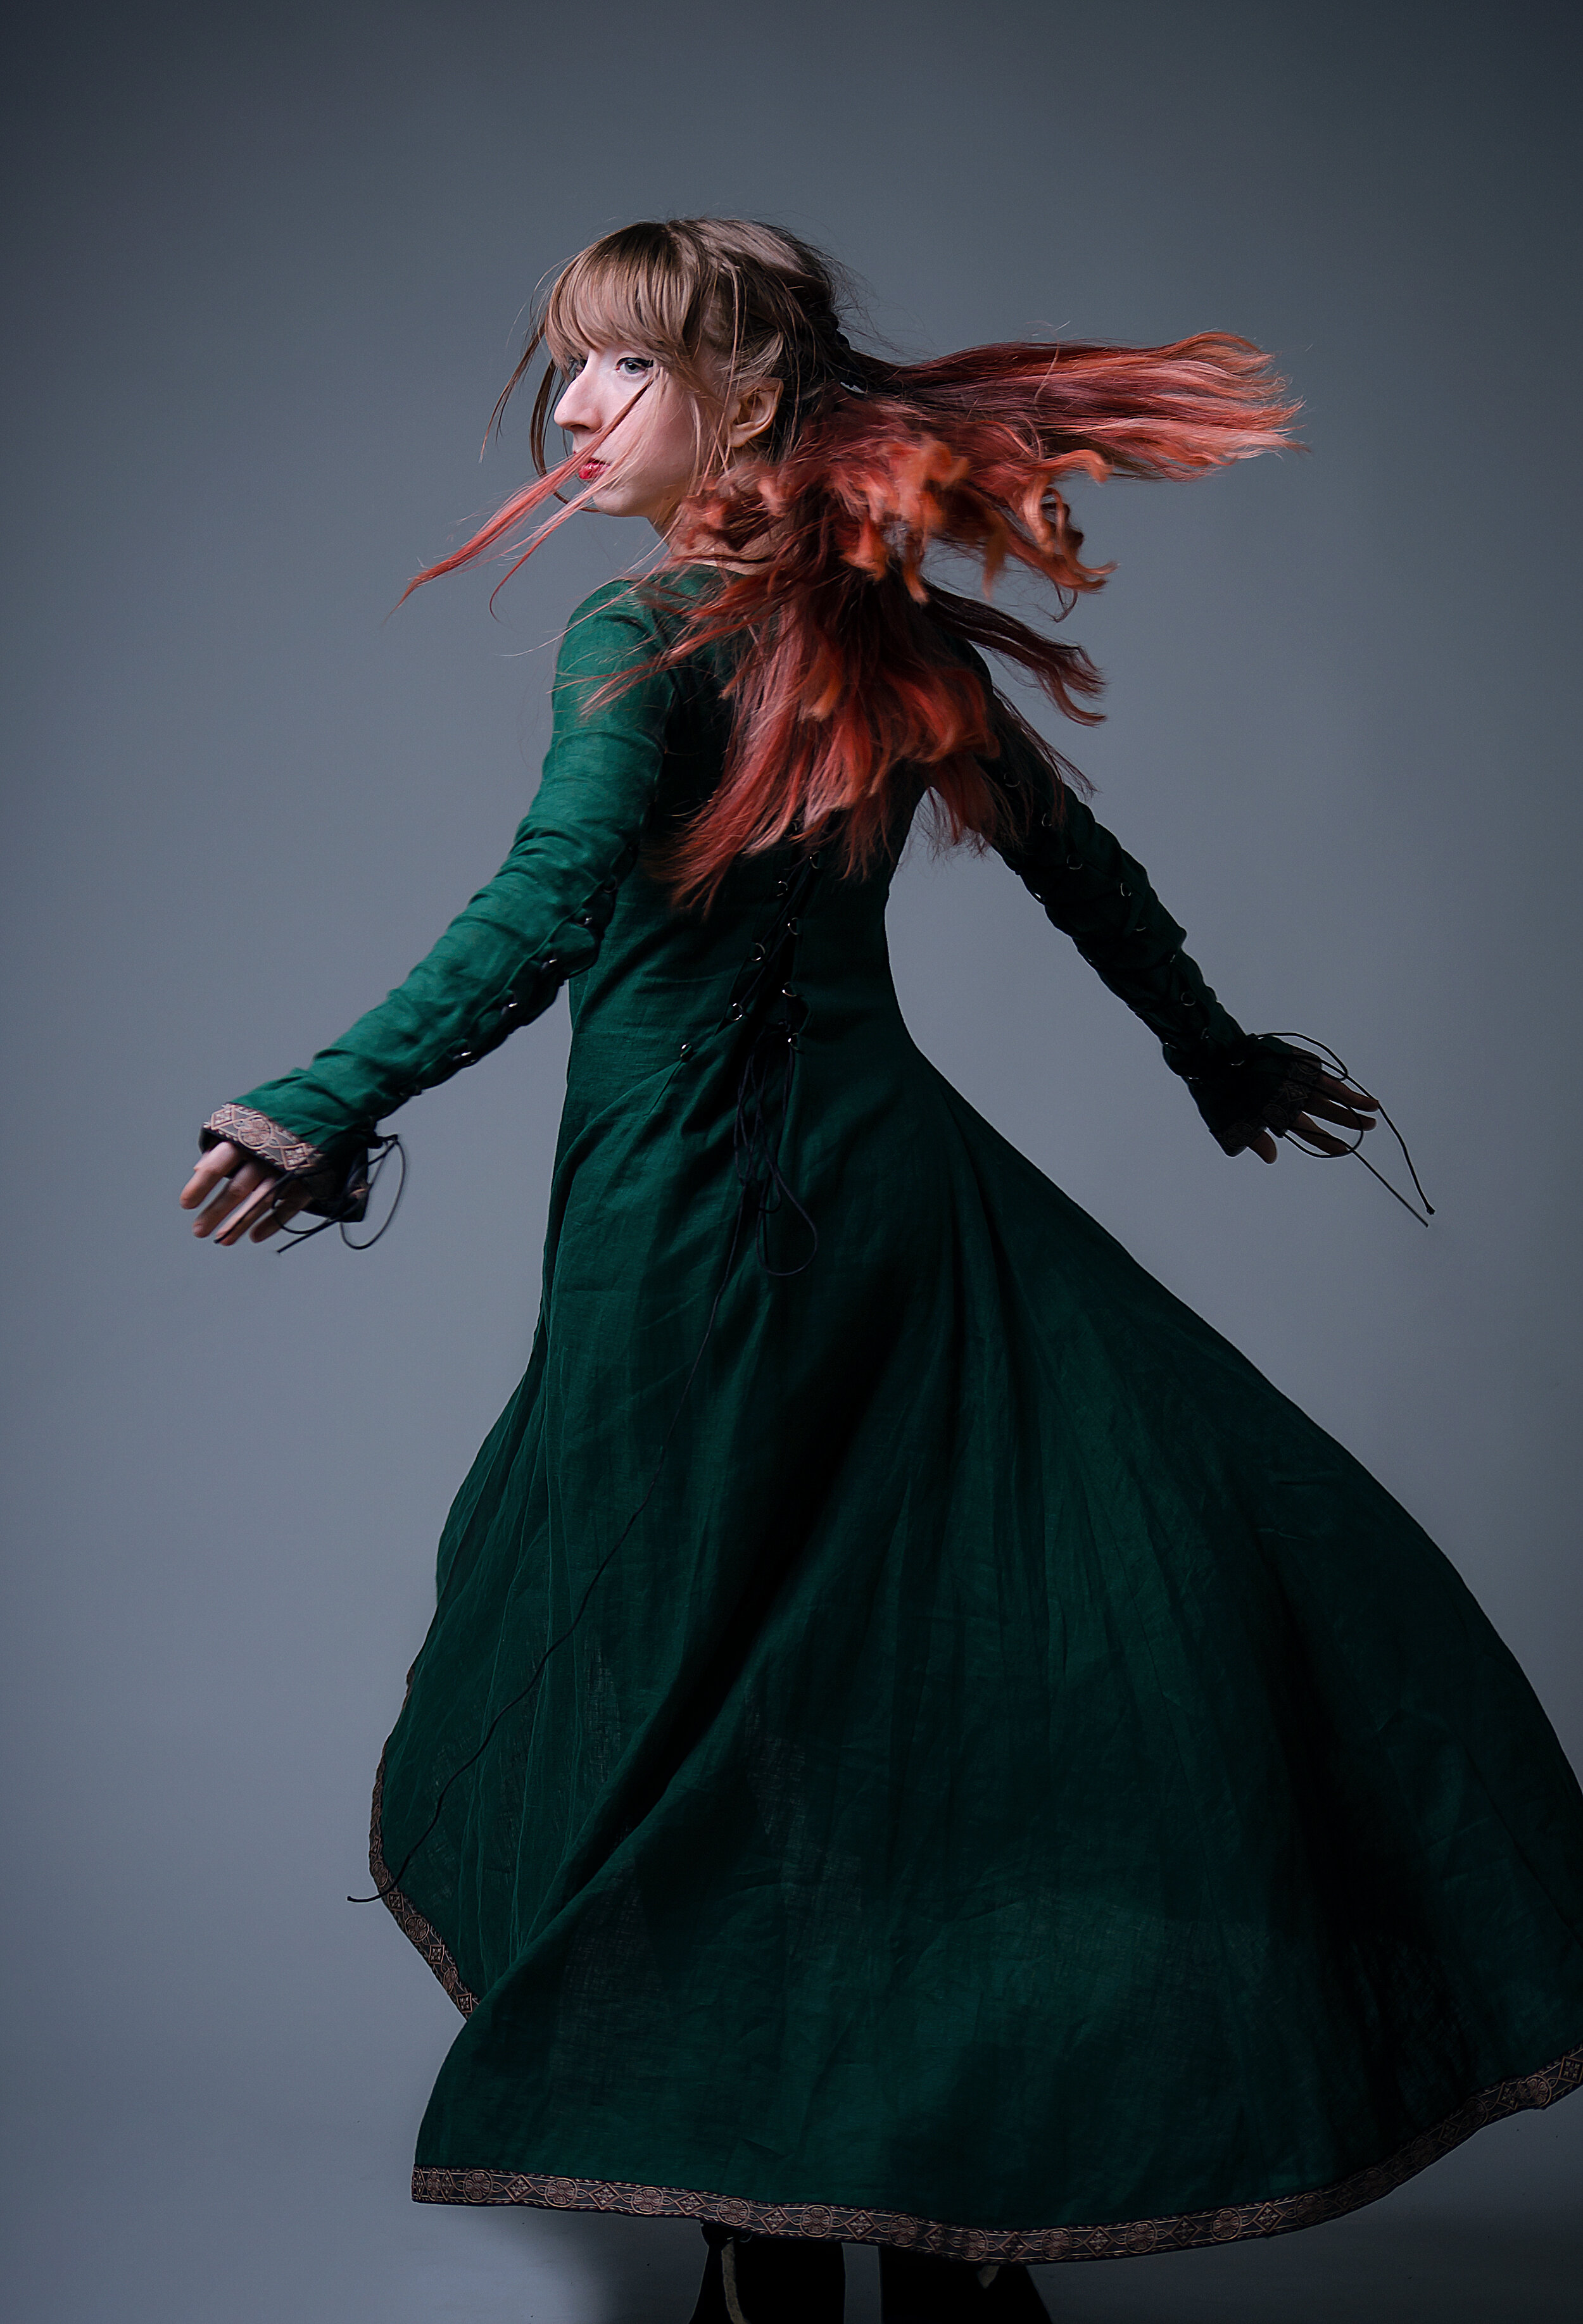 Redhead girl spinning in the long dress